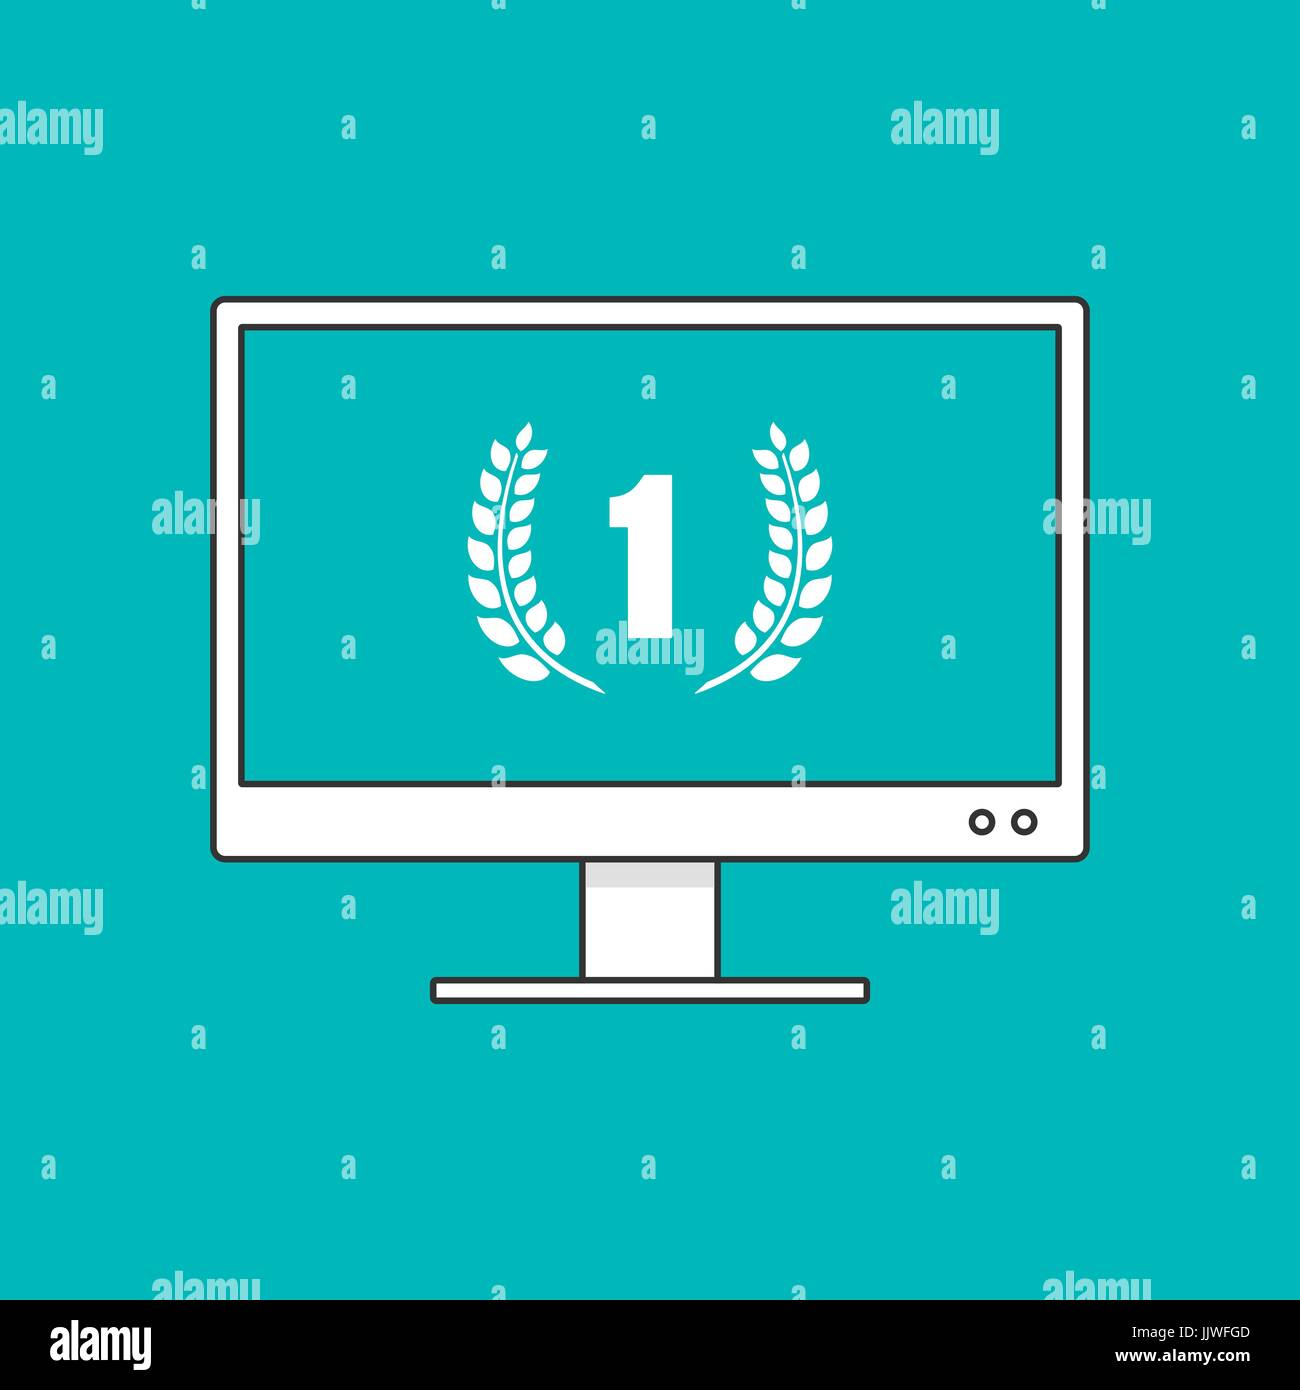 Best online service customer support concept depicted by the number one surrounded by laurel wreaths flat icon on monitor vector illustration Stock Vector